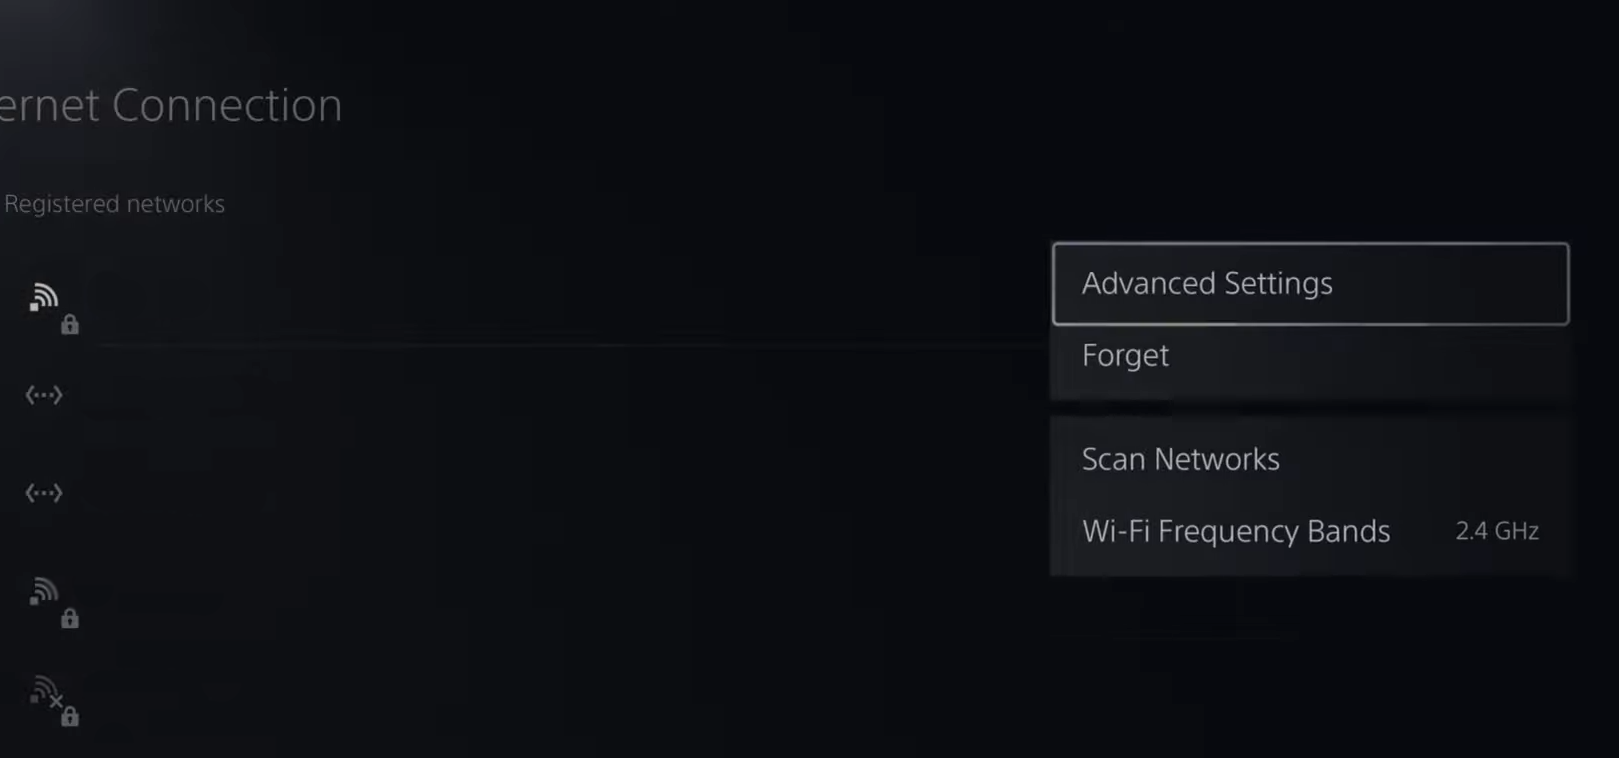 'Advanced Settings' for PlayStation's Internet Connection.